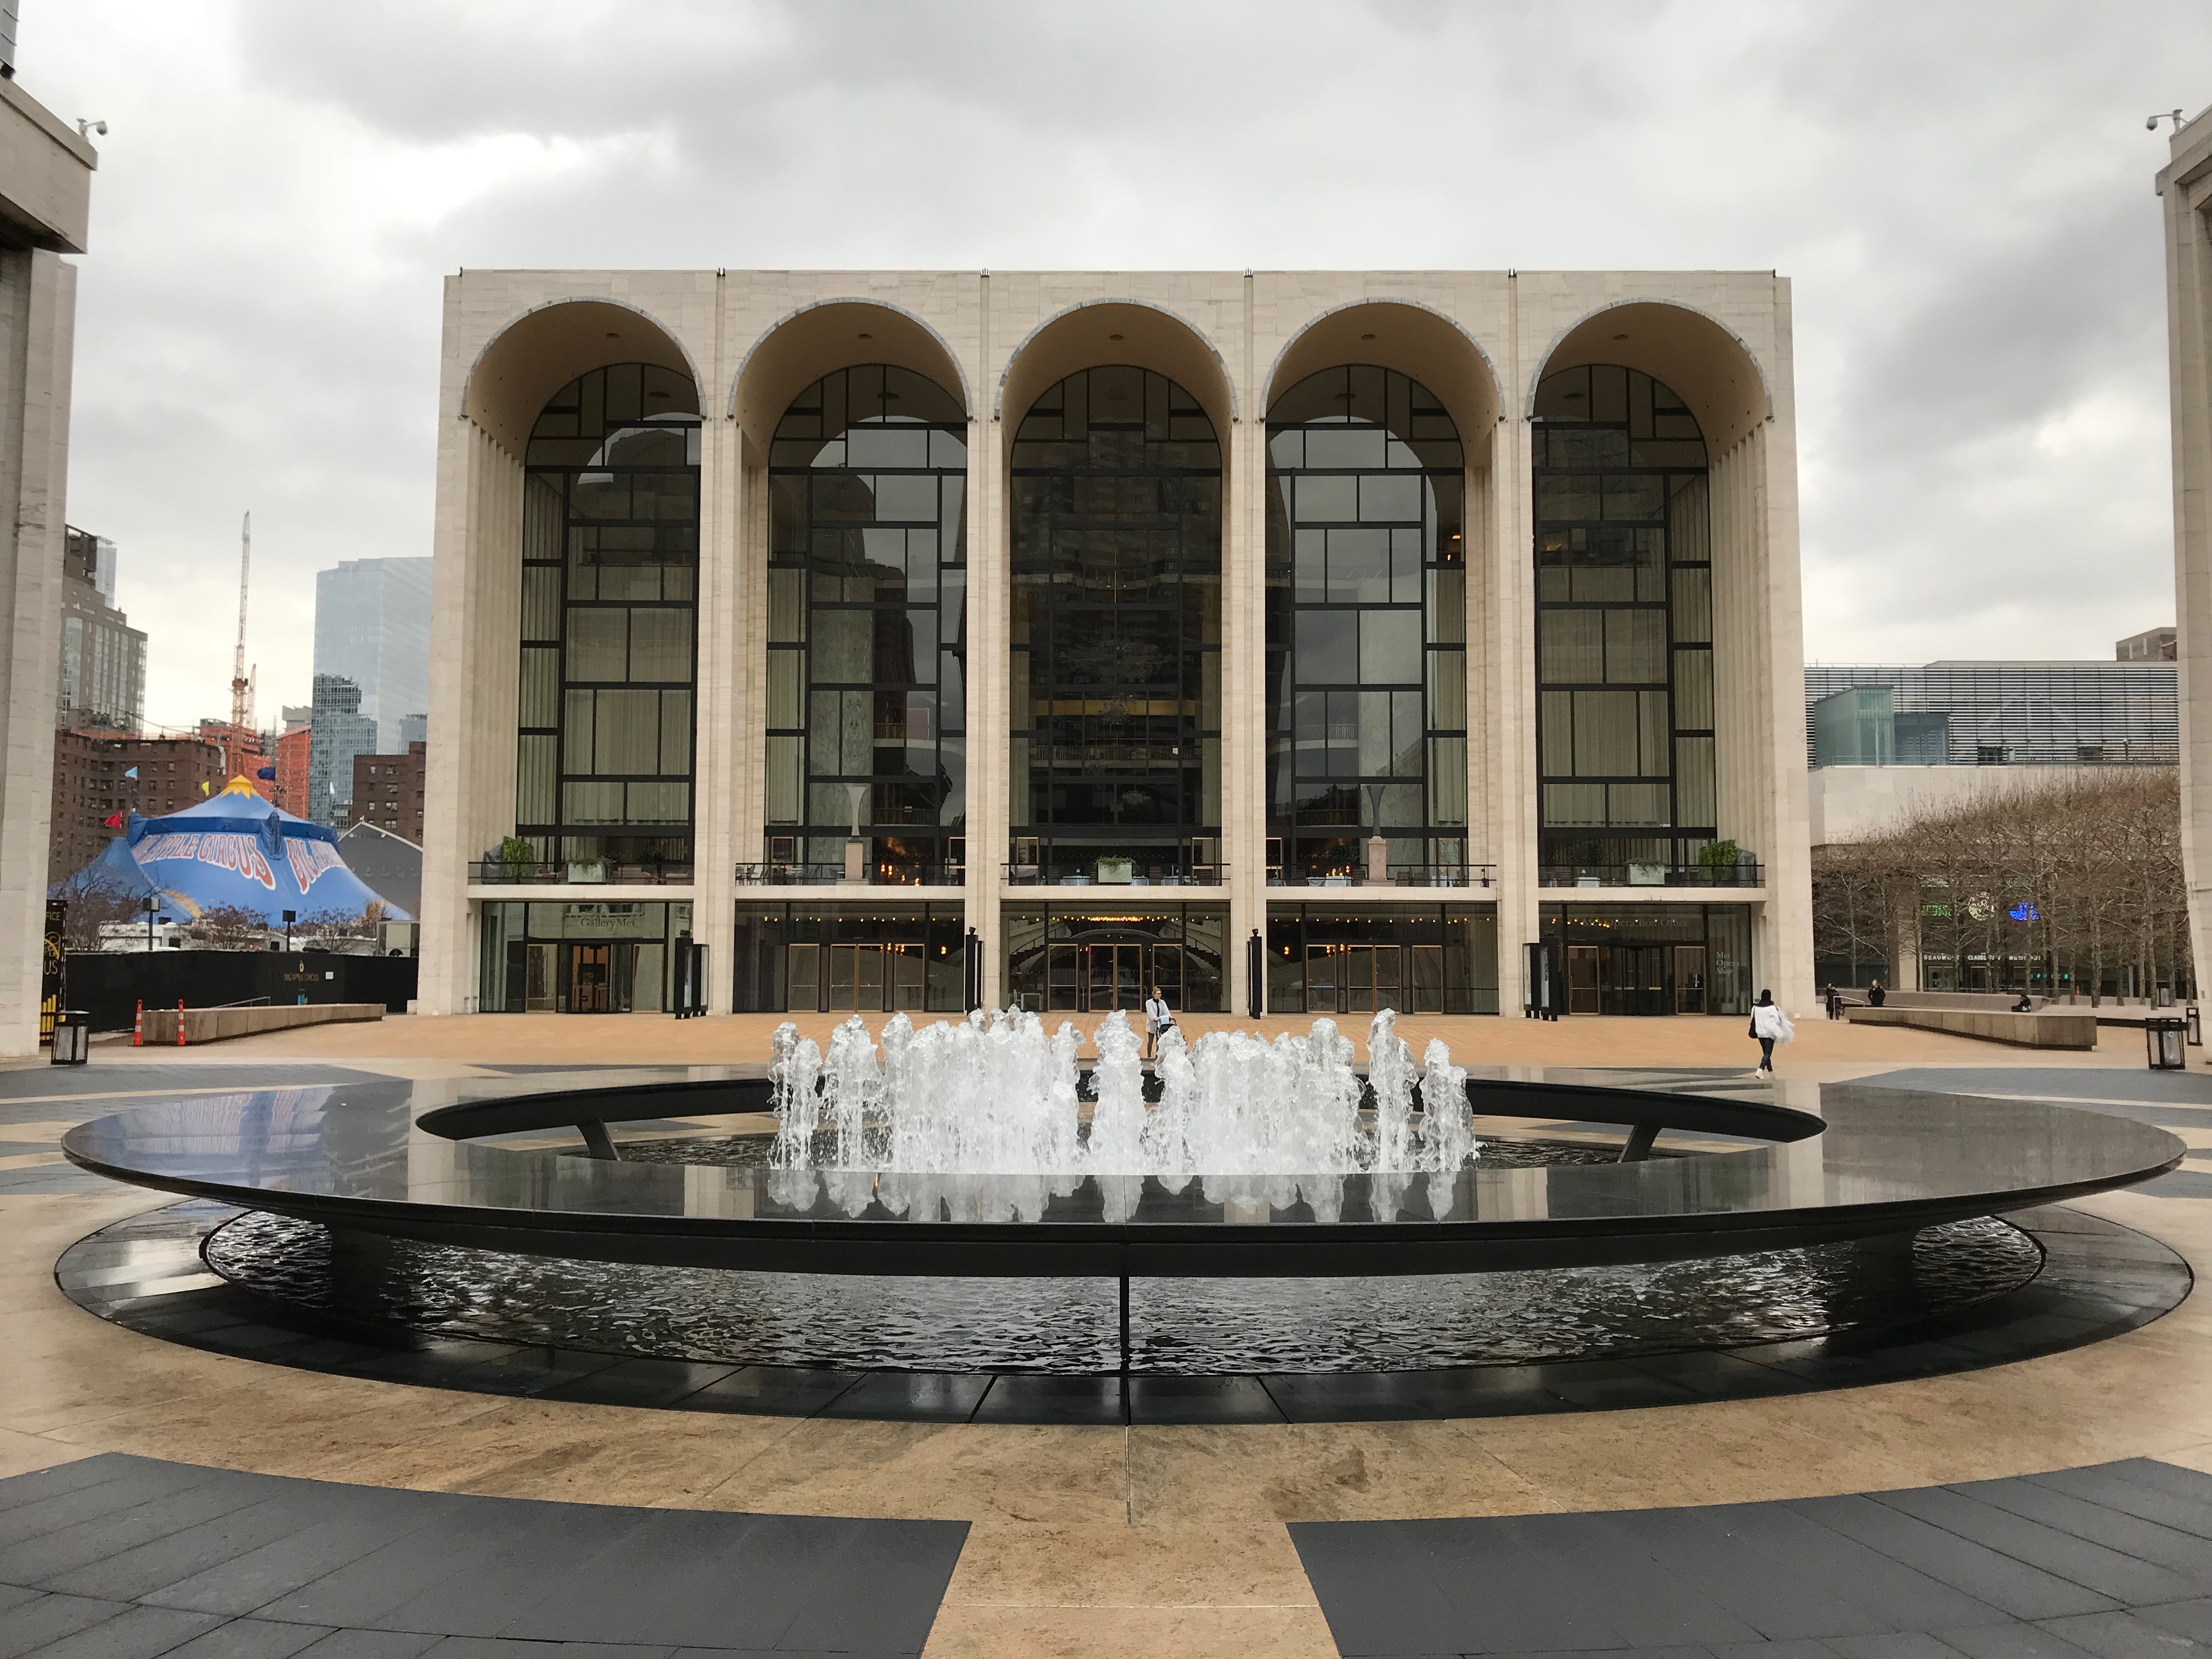 The Metropolitan Opera, which took more than $200,000 from the Sackler family in recent years. (DCNF/Ethan Barton)